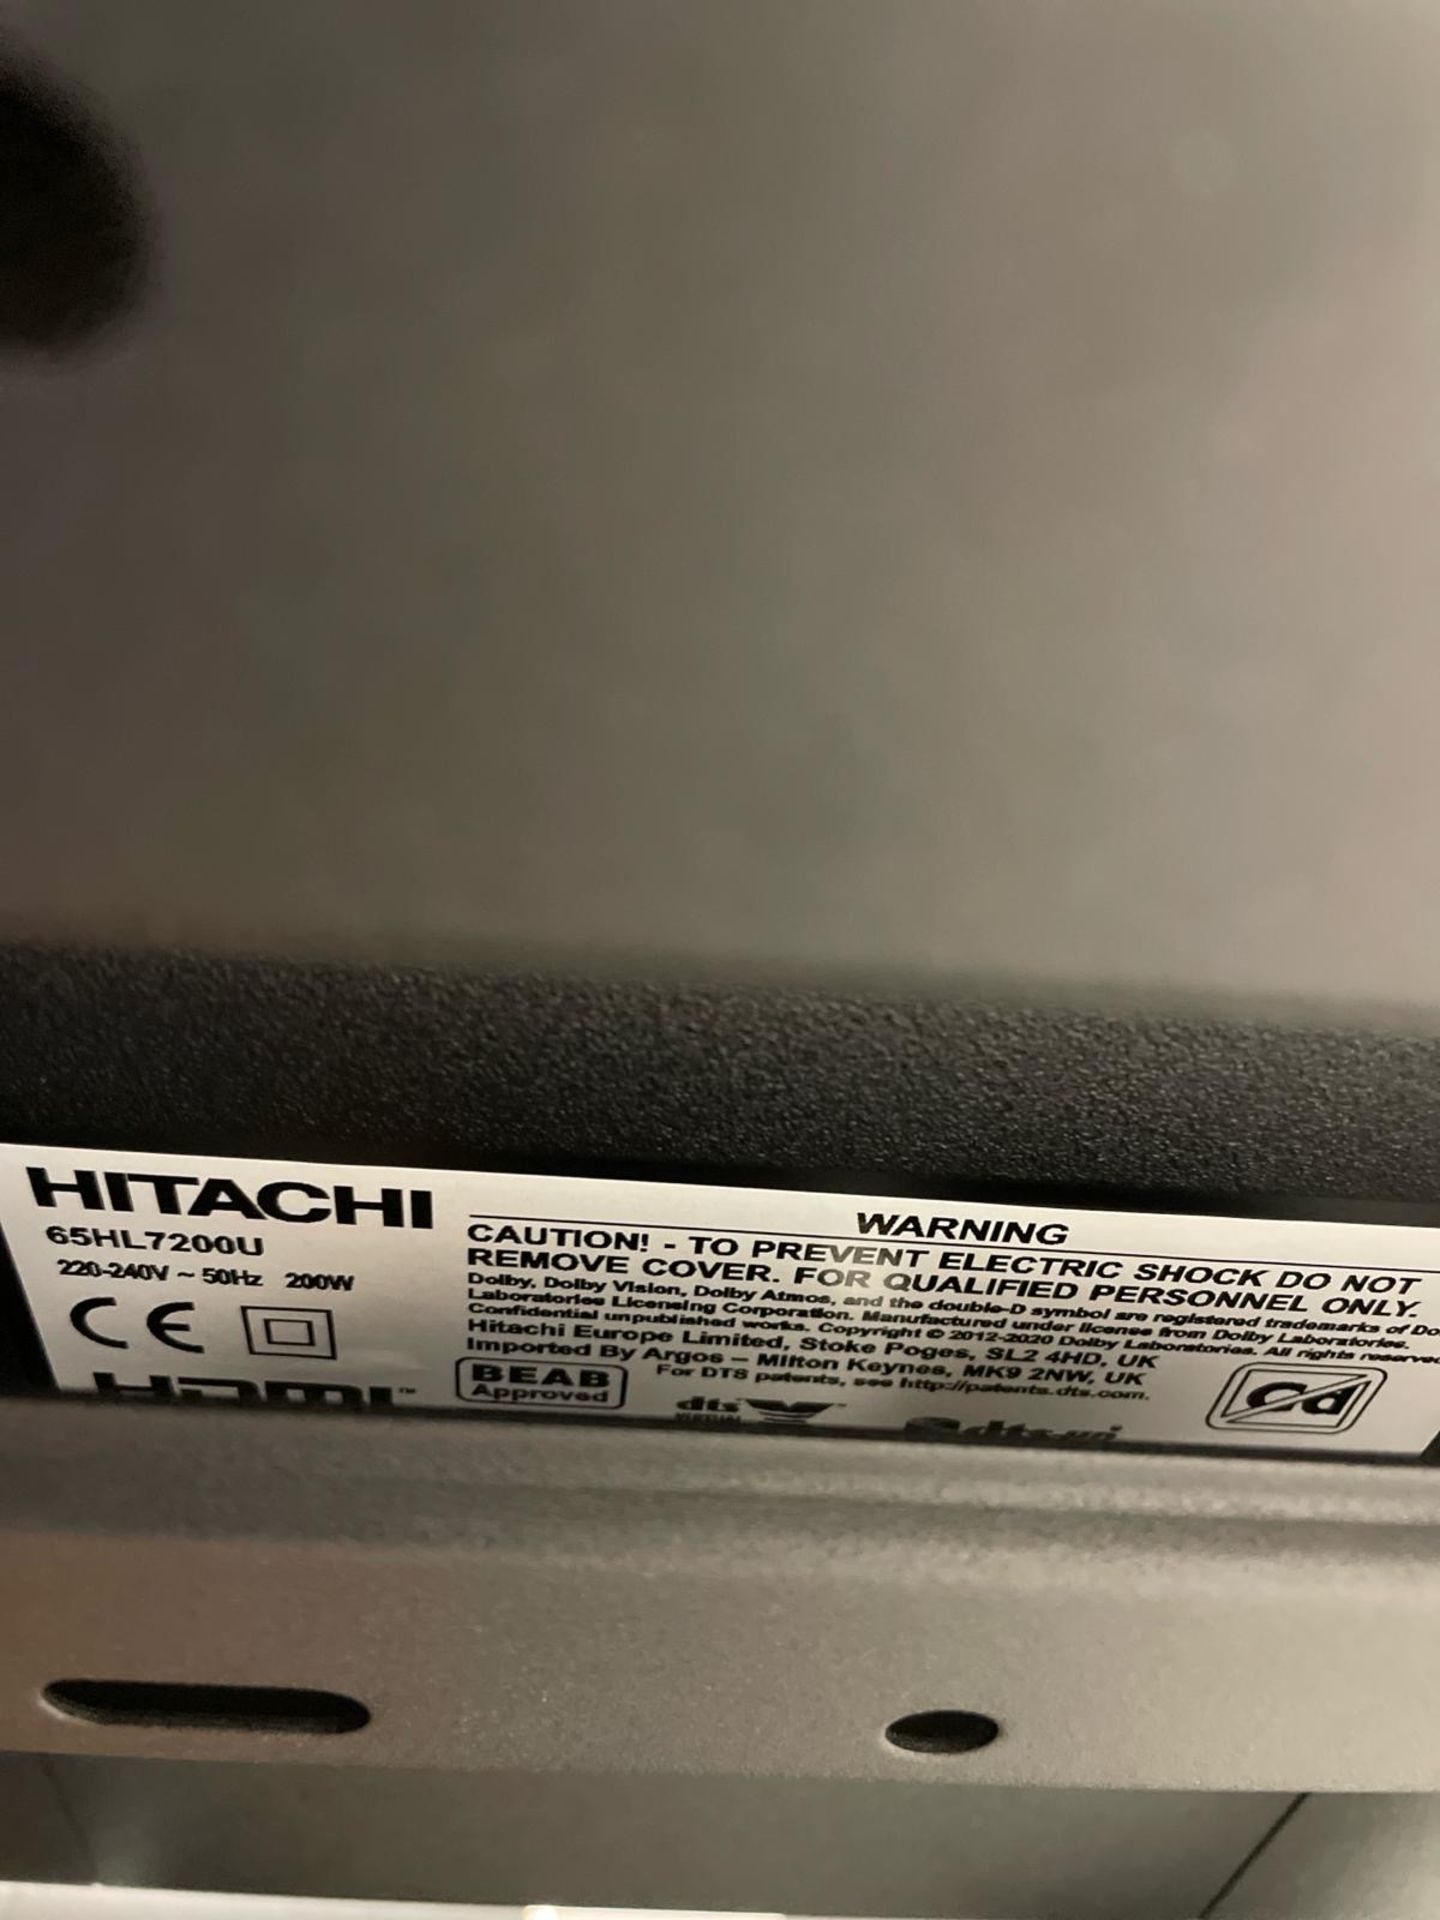 Hitachi 65HL7200U Television on Mobile Stand (Located Rugby. Please Refer to General Notes) - Image 2 of 3